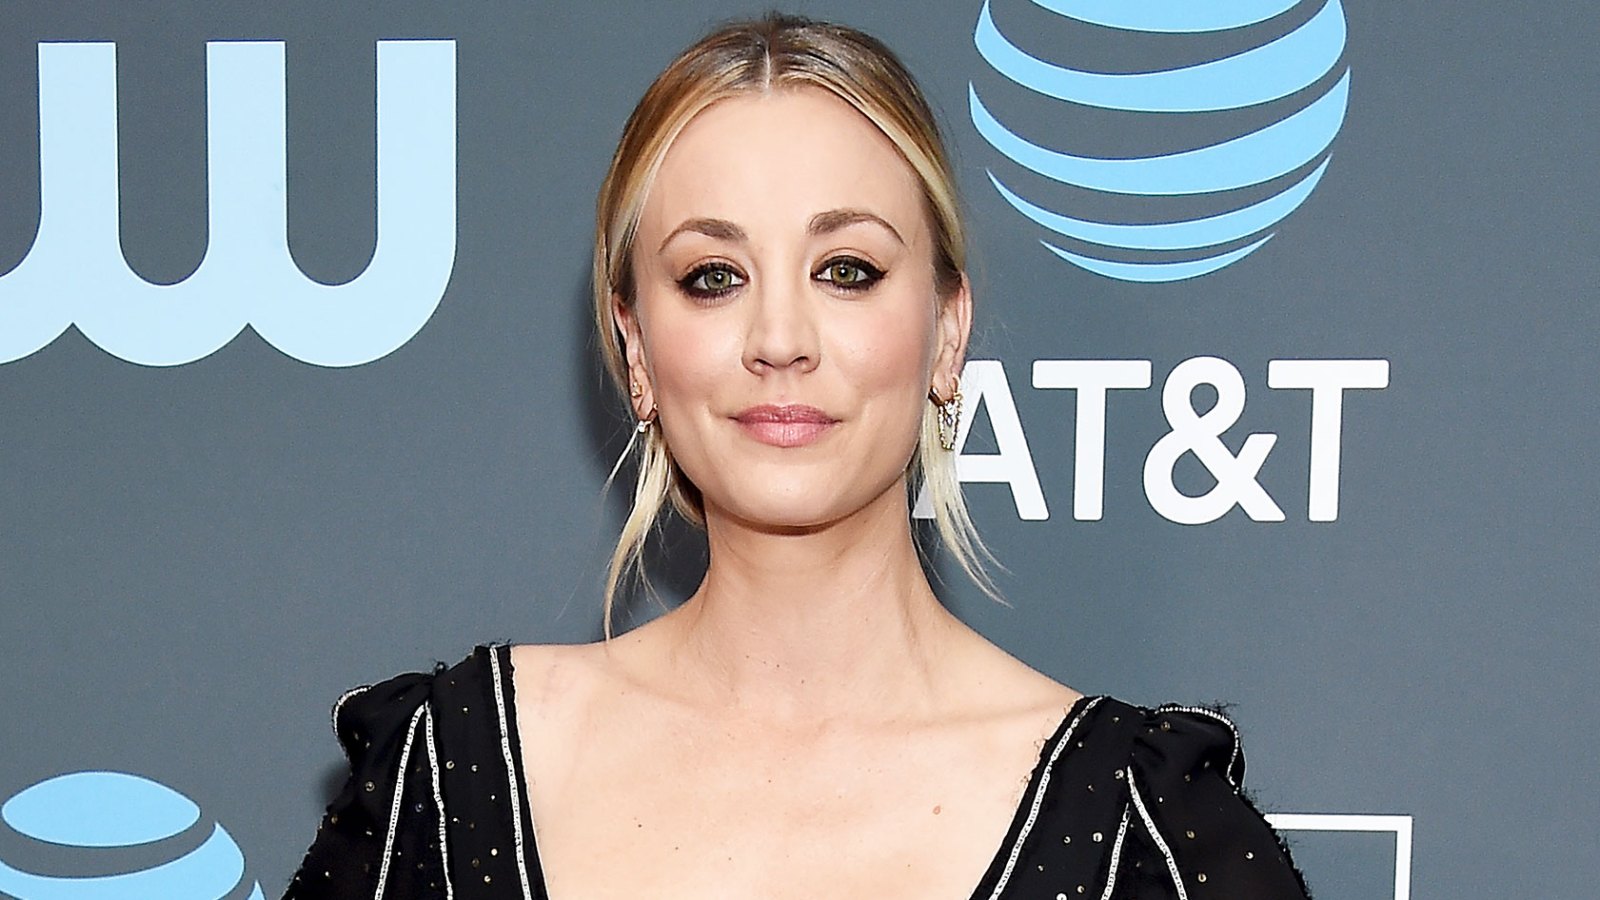 Kaley Cuoco Left Her Wallet at a Restaurant and It Was Returned in Tact: 'I Will Never Forget This’